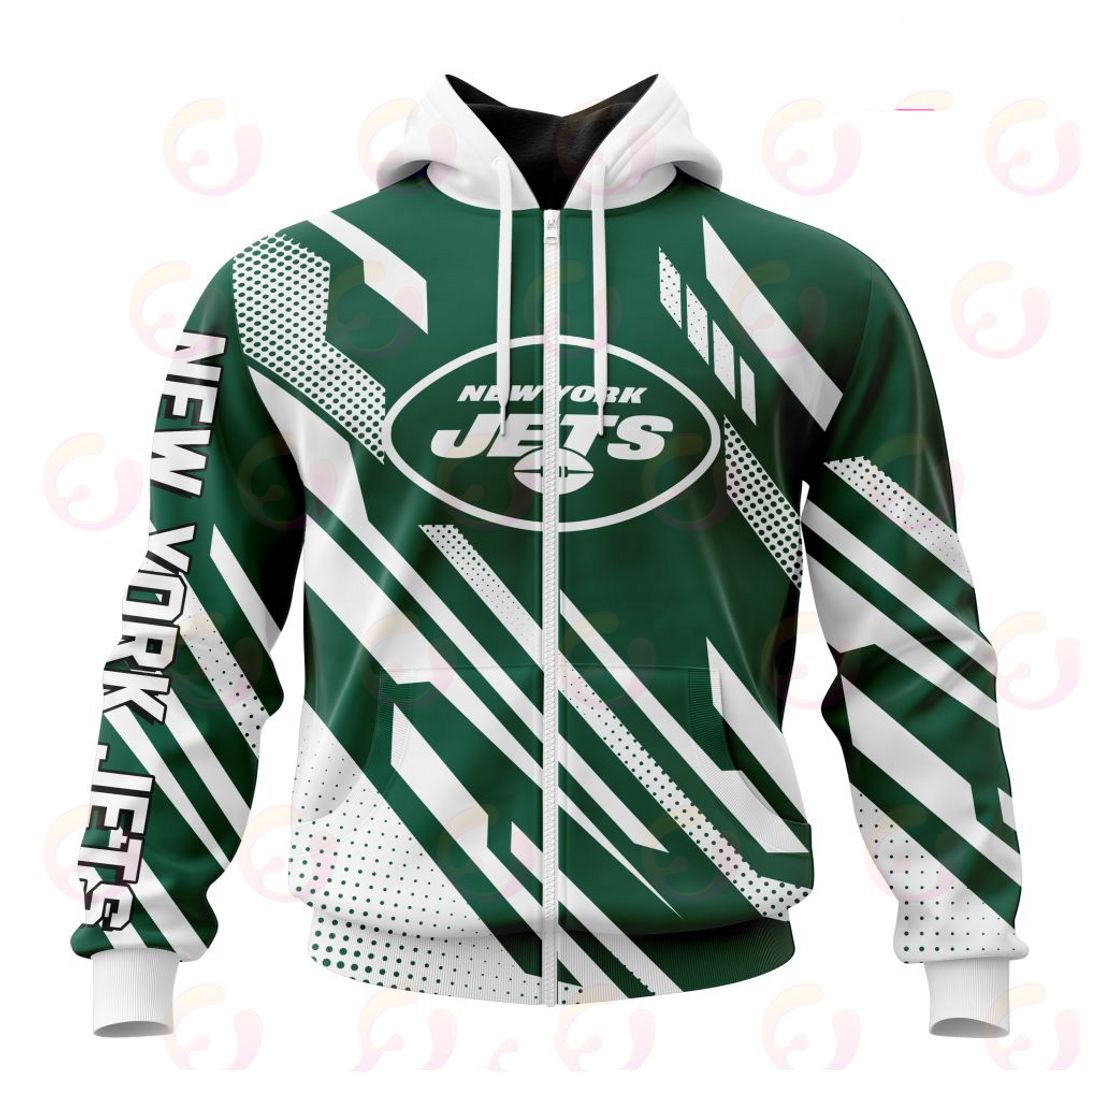 NEW YORK JETS 3D HOODIE SPECIAL MOTOCROSS CONCEPT